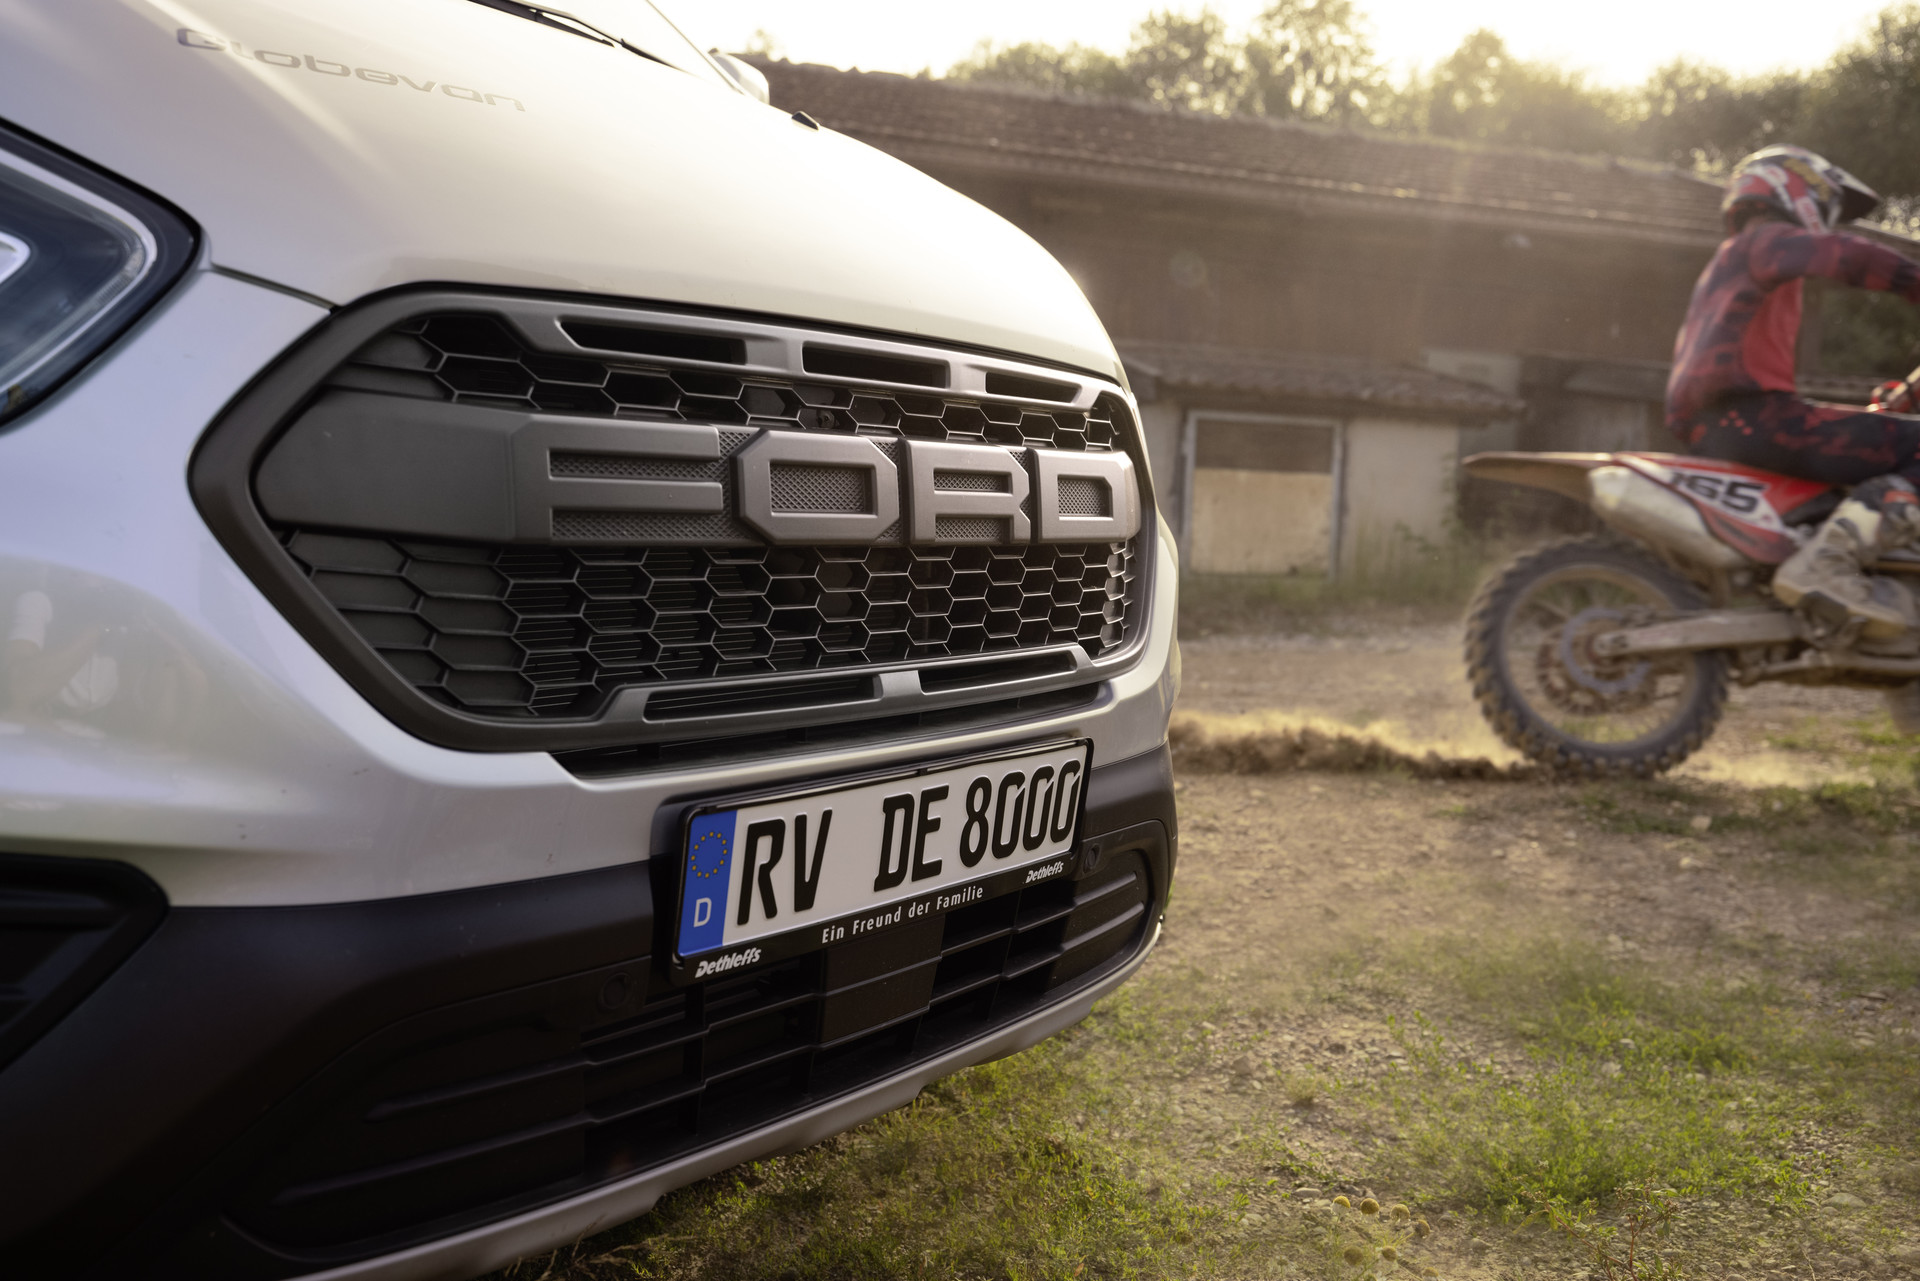 Front and rear bumpers in dark accent colour. Dark grille in Trail design with distinctive Ford lettering.